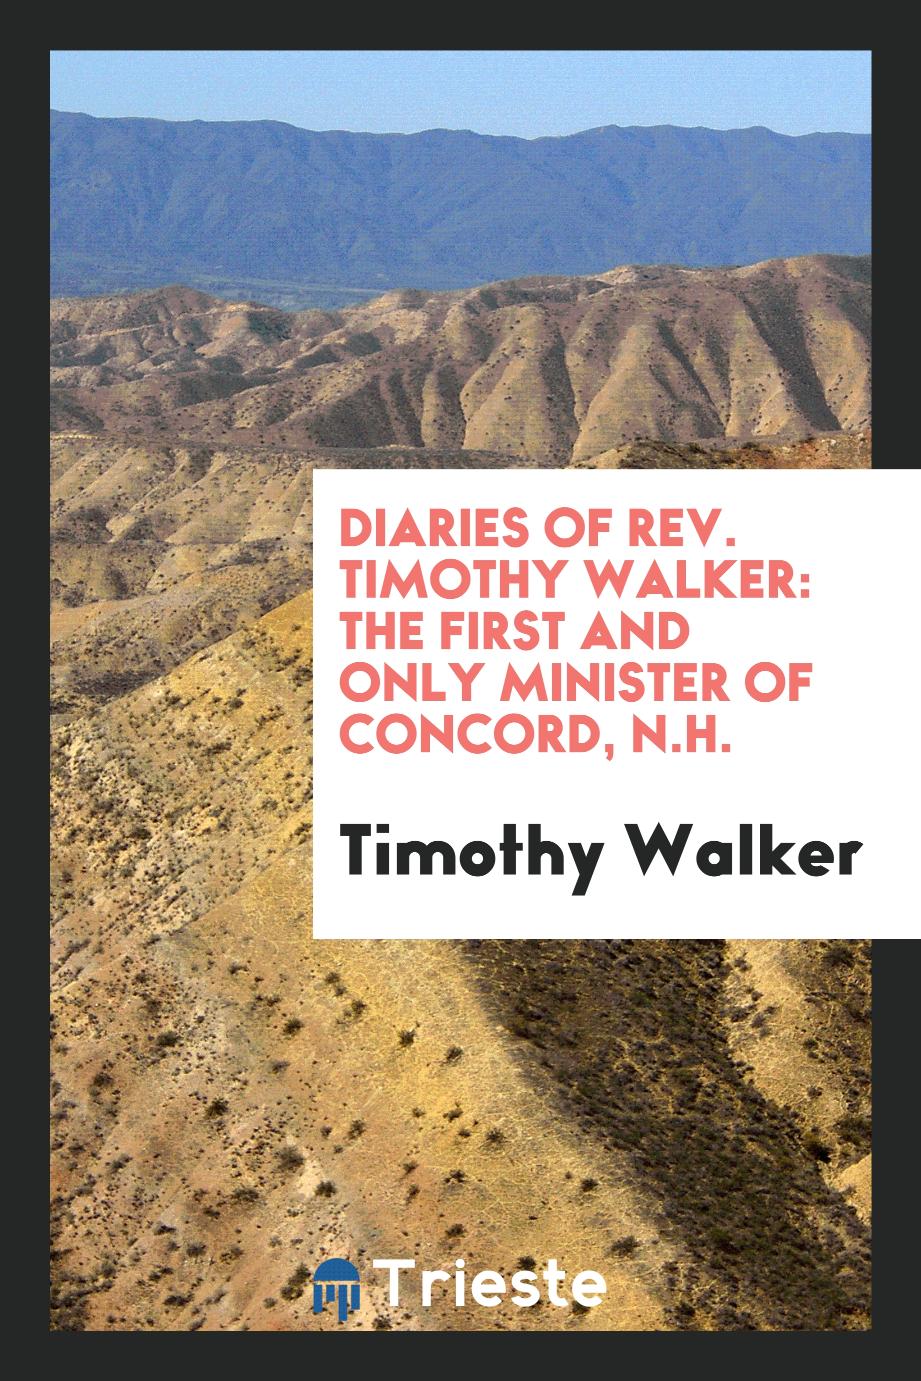 Diaries of Rev. Timothy Walker: The First and Only Minister of Concord, N.H.